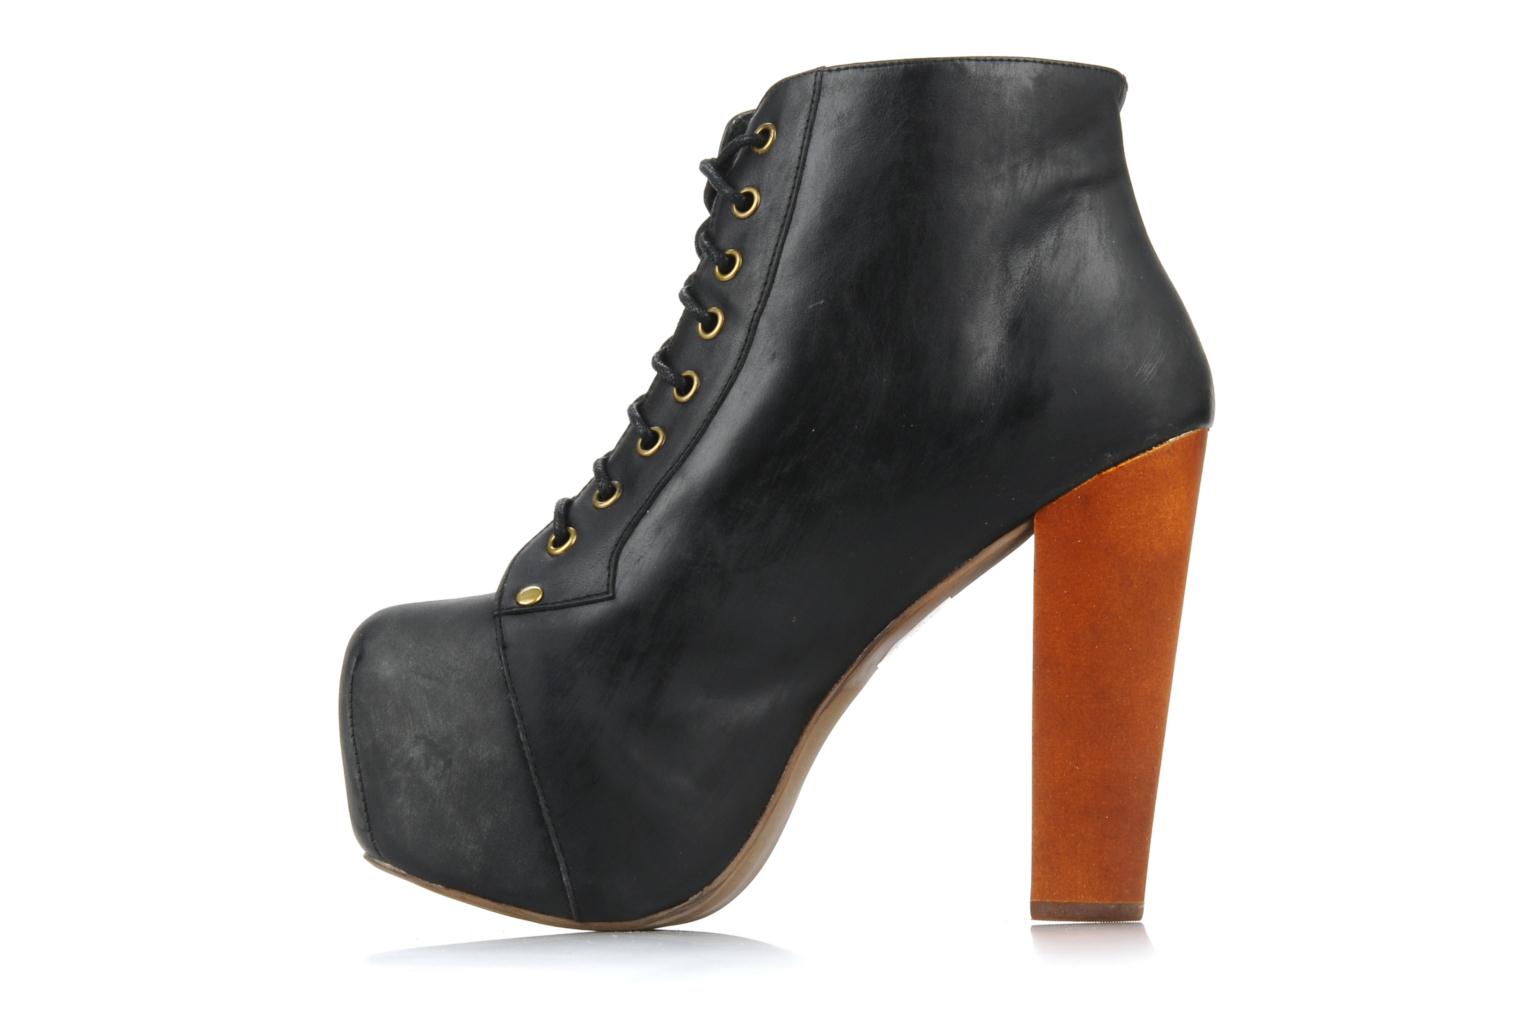 Jeffrey Campbell Lita Ankle boots in Black at Sarenza (79478)